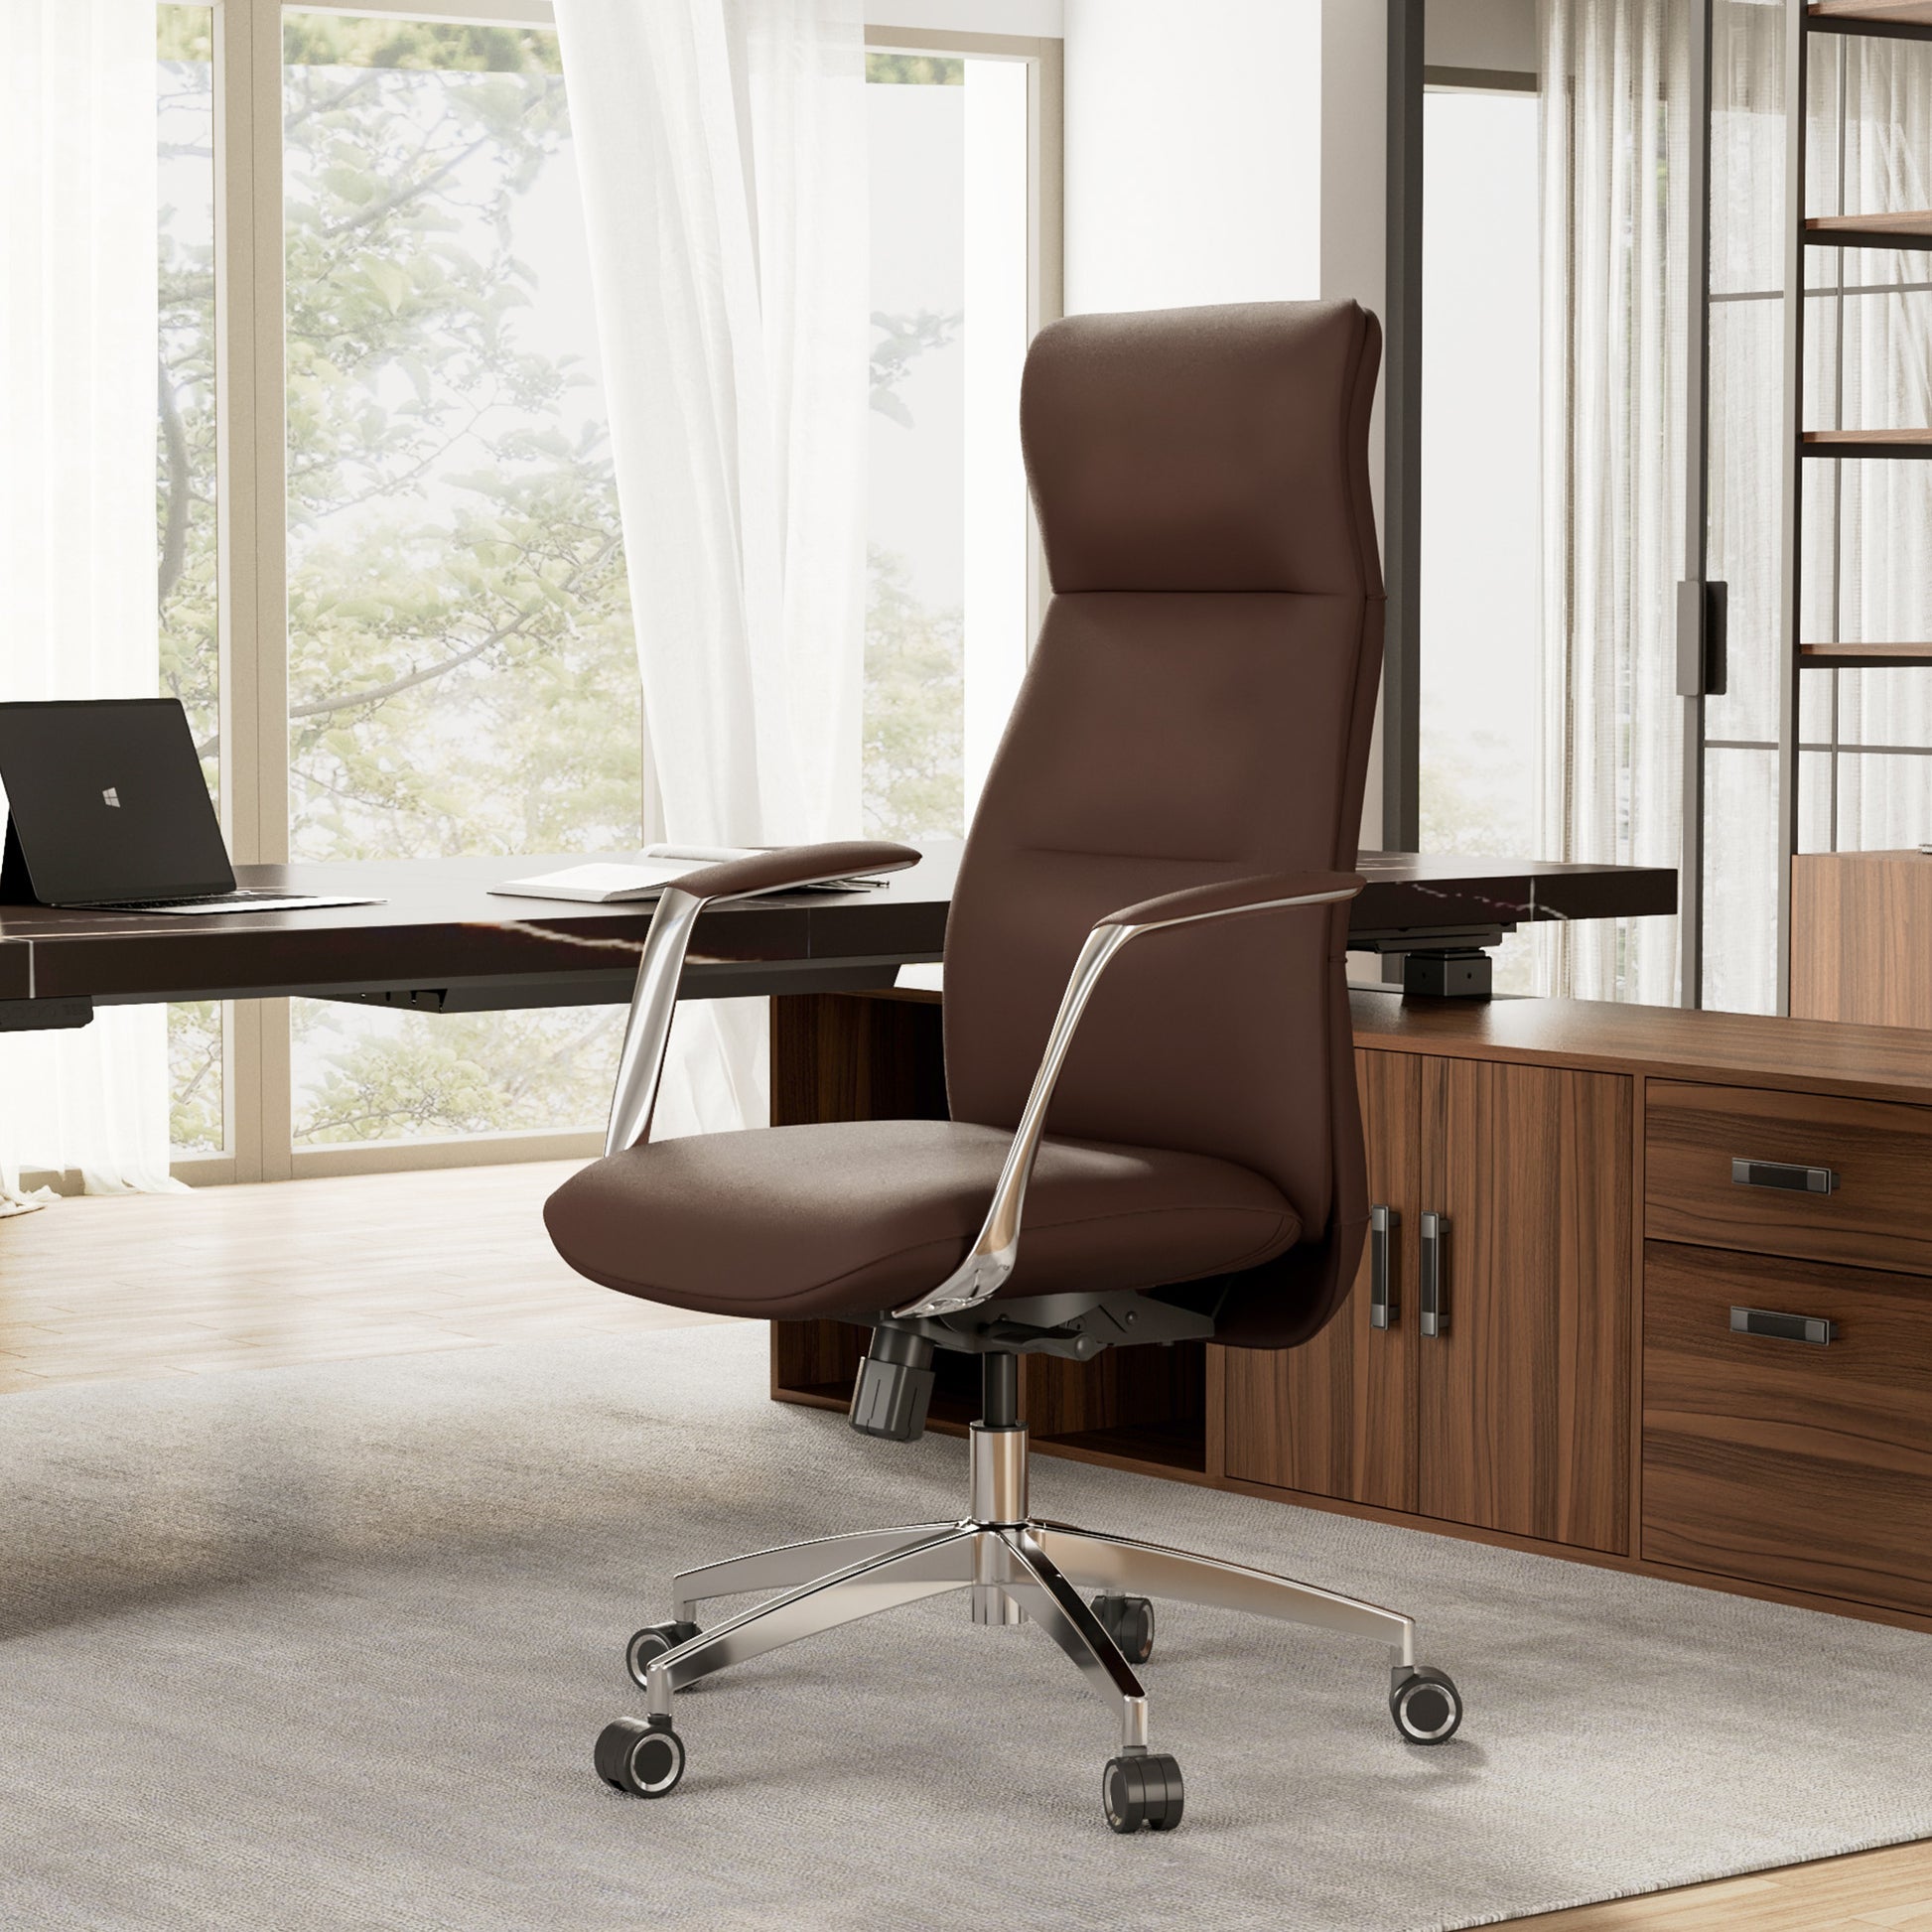 Royal Slim OC08 Leather High Back Executive Office Chair, Brown in High End Office 